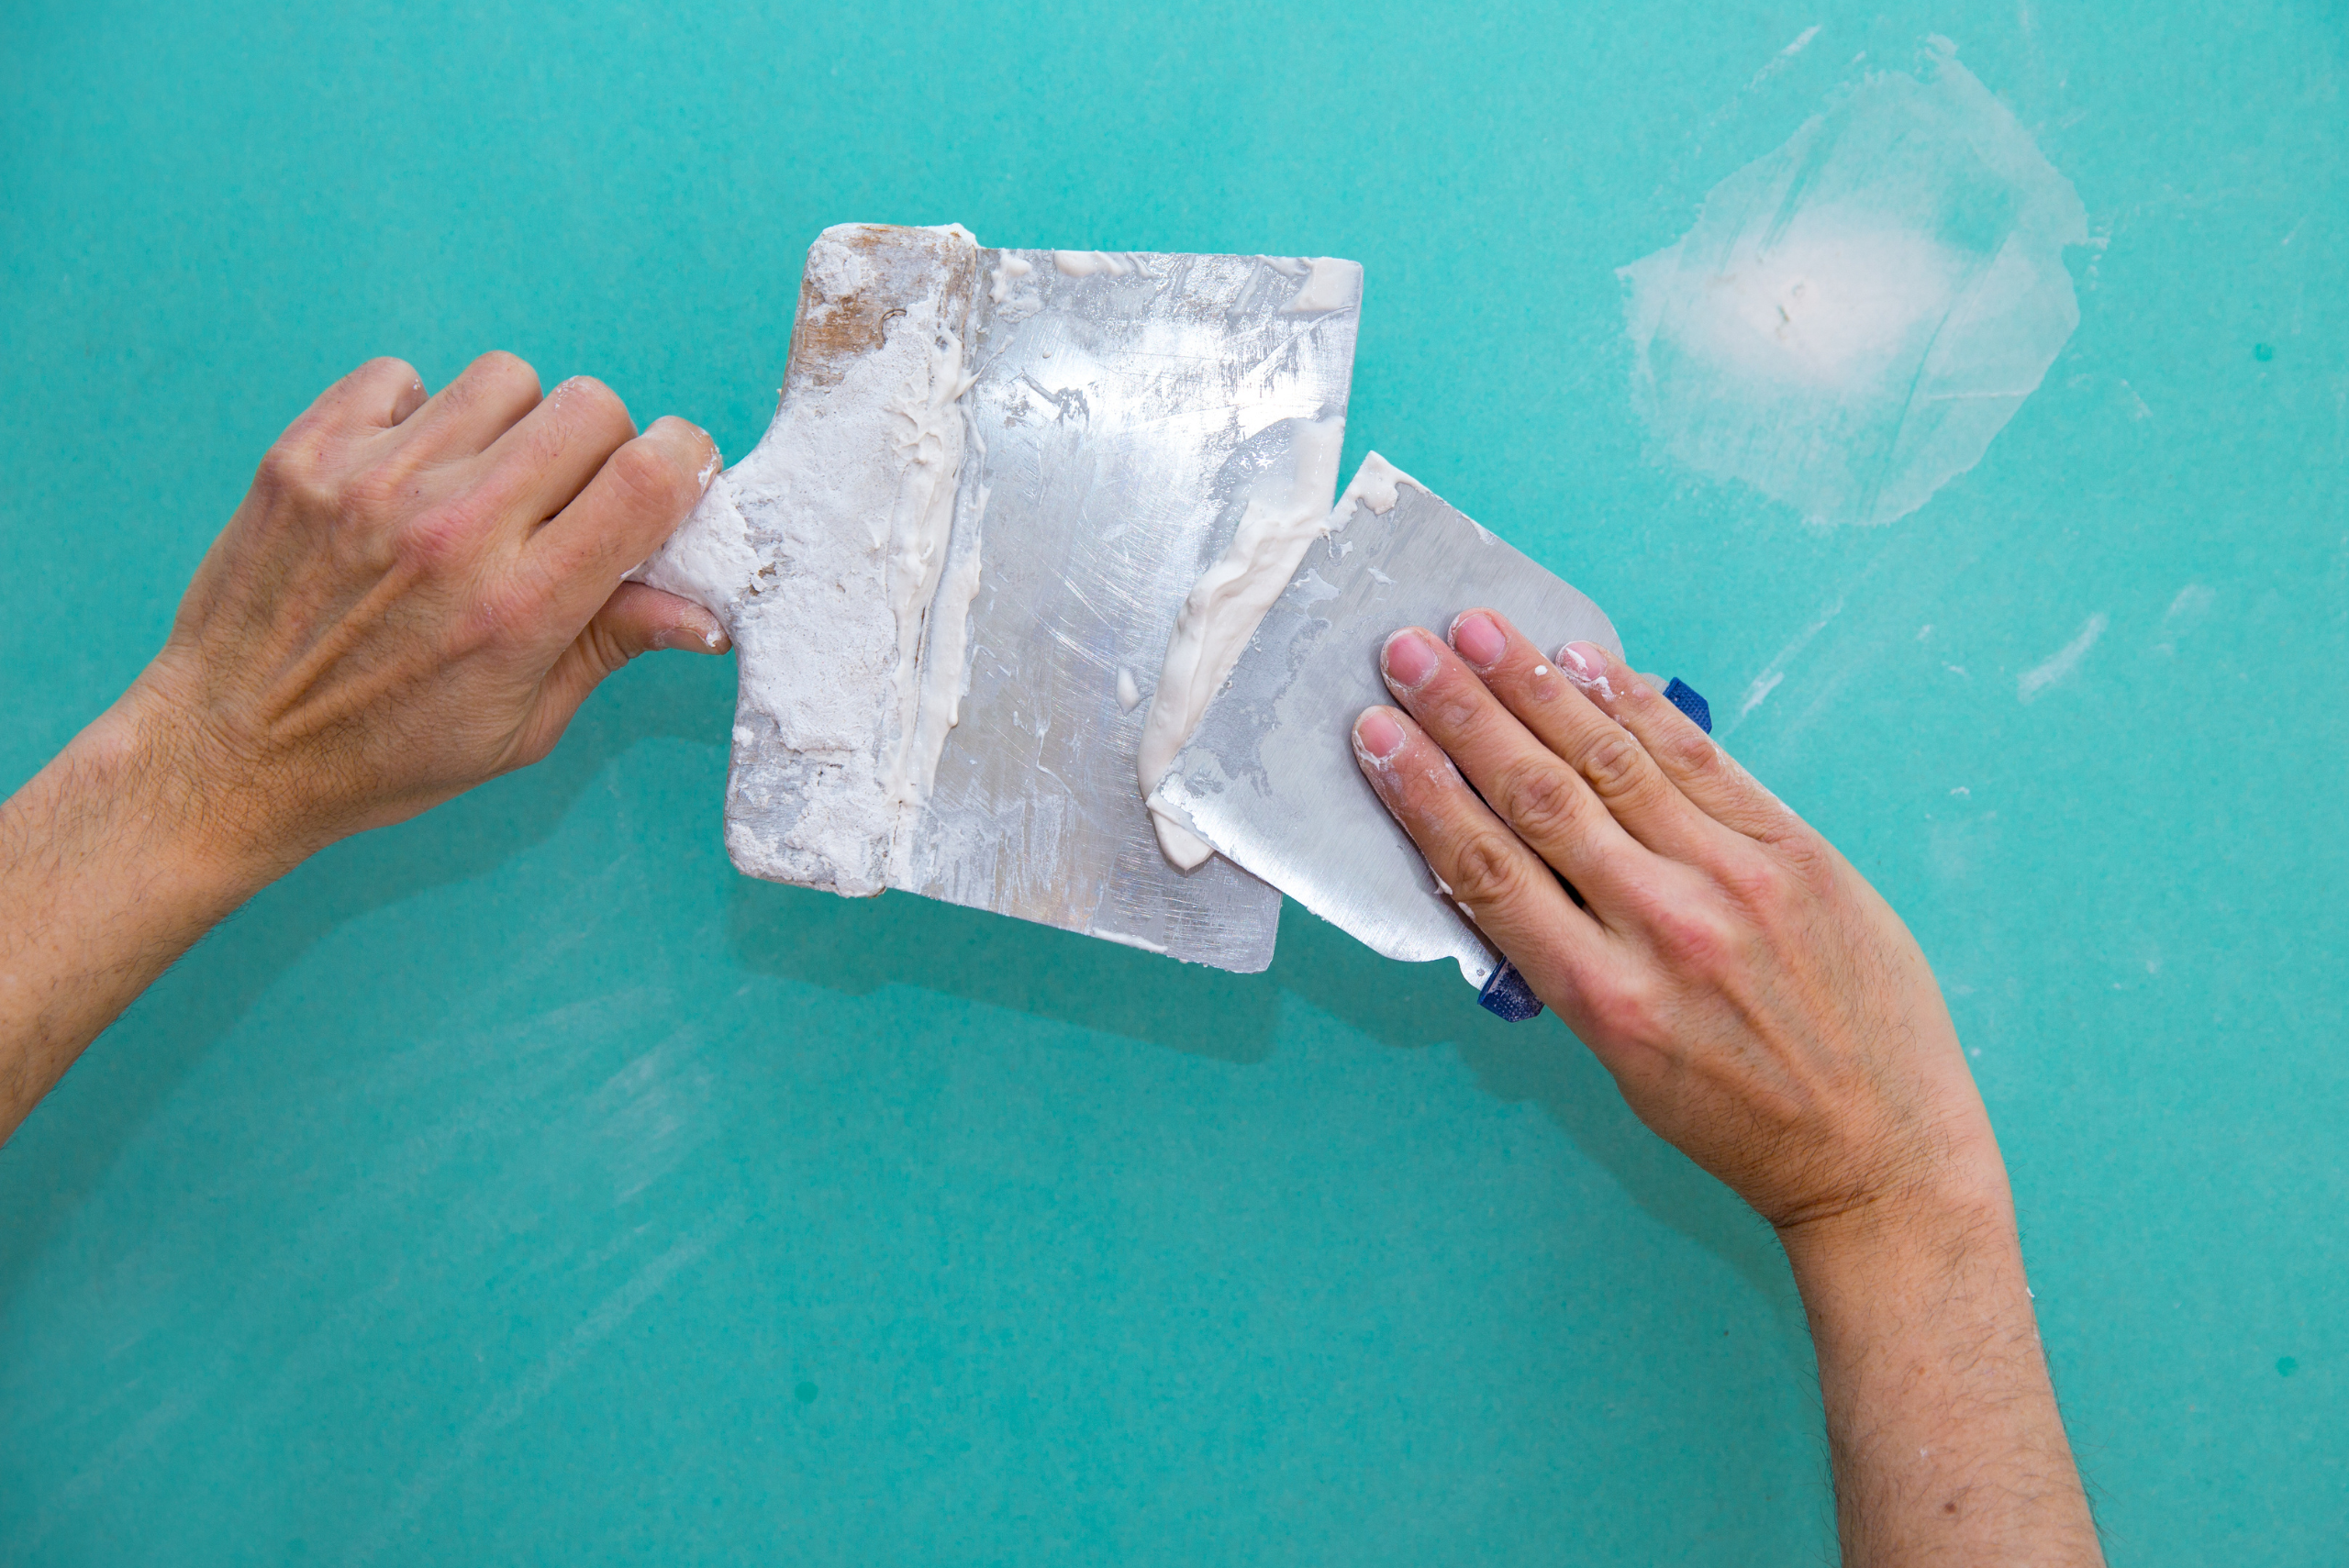 Closeup of someone's handing mixing drywall compound.